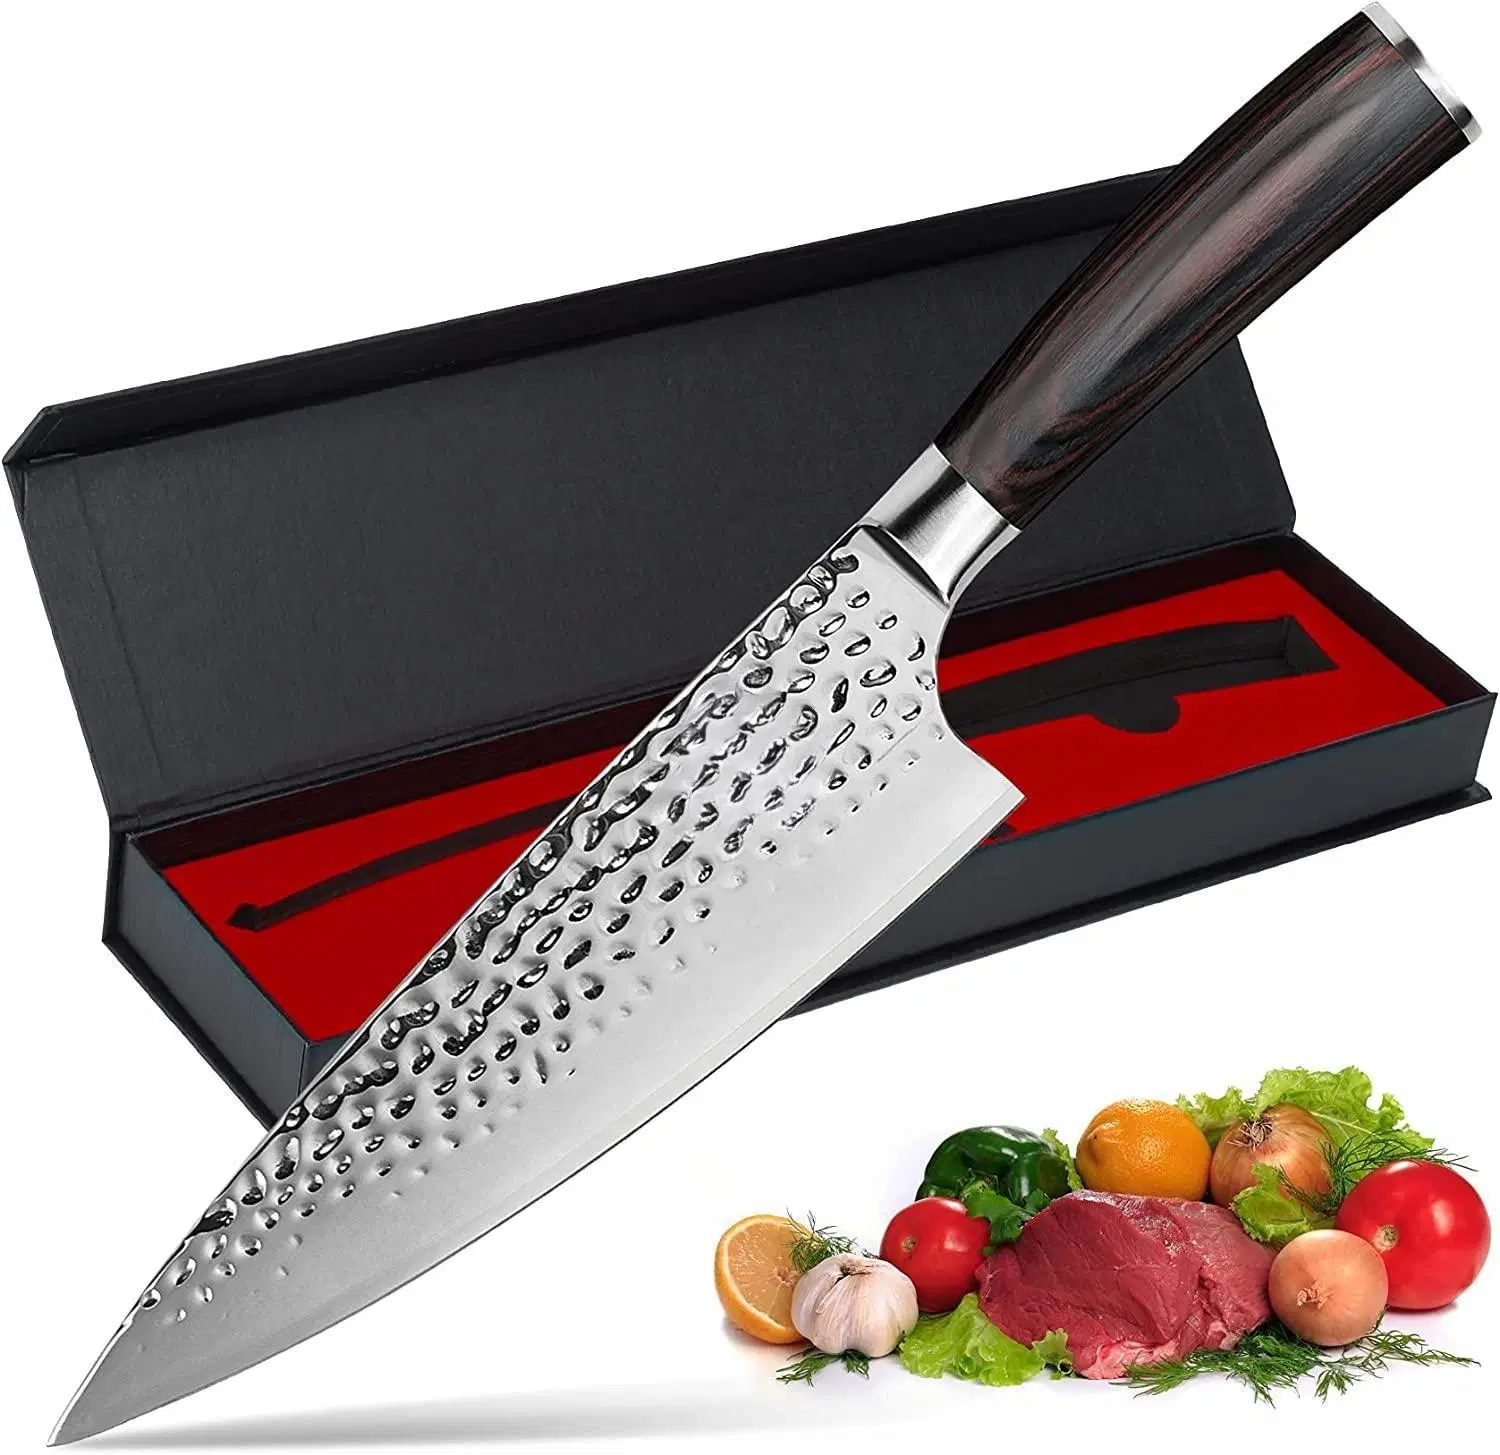 Stainless Steel Japanese Premium Sharp Cooking 8 Inch Damascus Chef Kitchen Knife